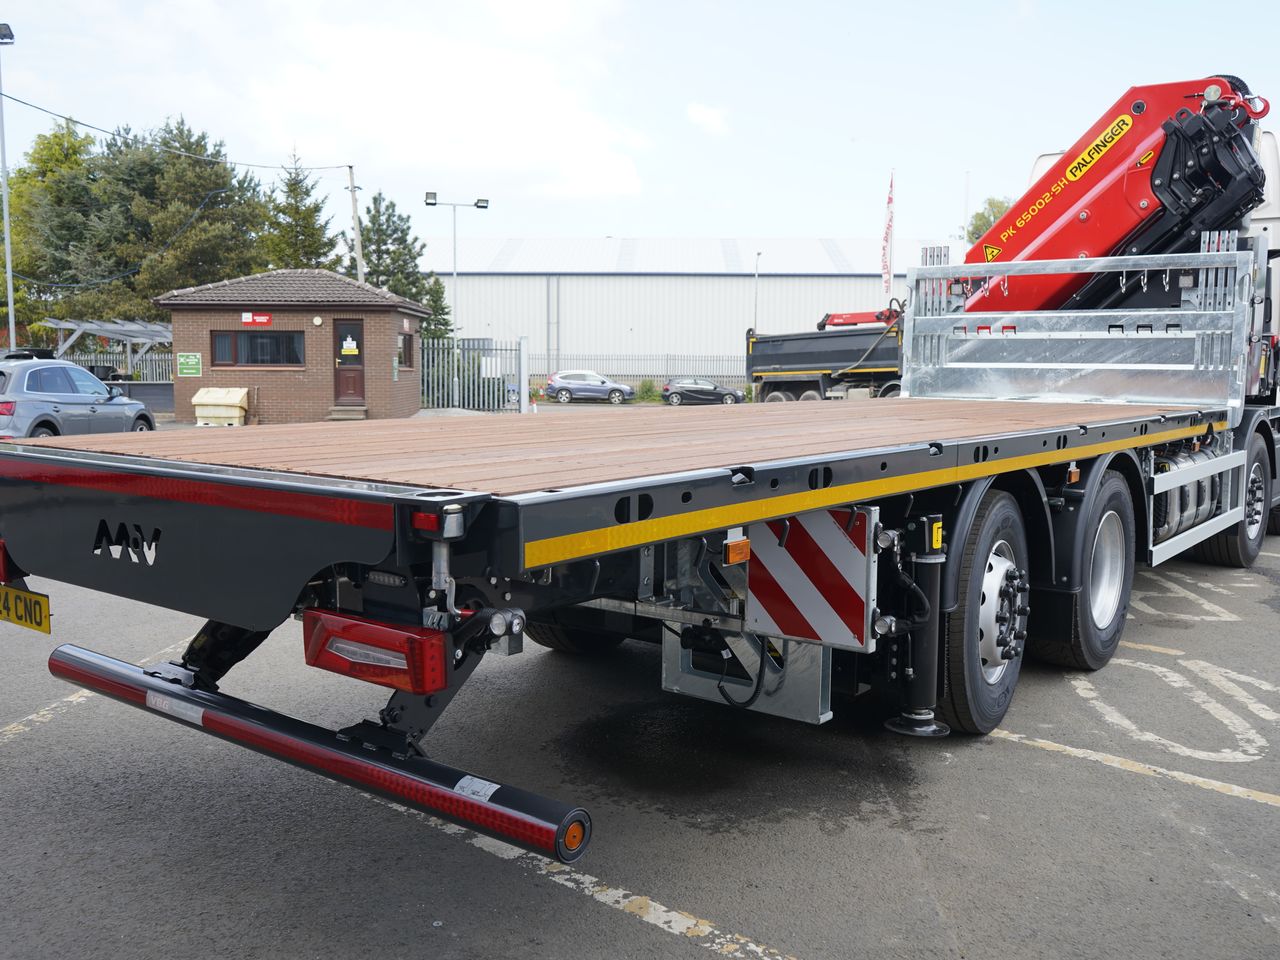 Ready to go Scania G460, Cabin Spec, 460, 32 Tonne, Highline Sleeper, Automatic, 28mm Keruing Hardwood Floor, 2 x 8.5 Tonne Front Axles, 4 x Crane Pads, Access Ladder, Bluetooth/AUX/USB Dashboard Input, , Palfinger, PK 65002 SH HIGH PERFORMANCE | for sale at MV Commercial, the UKs leading Truck, Trailers and Van supplier. (SM24CNO 286852)